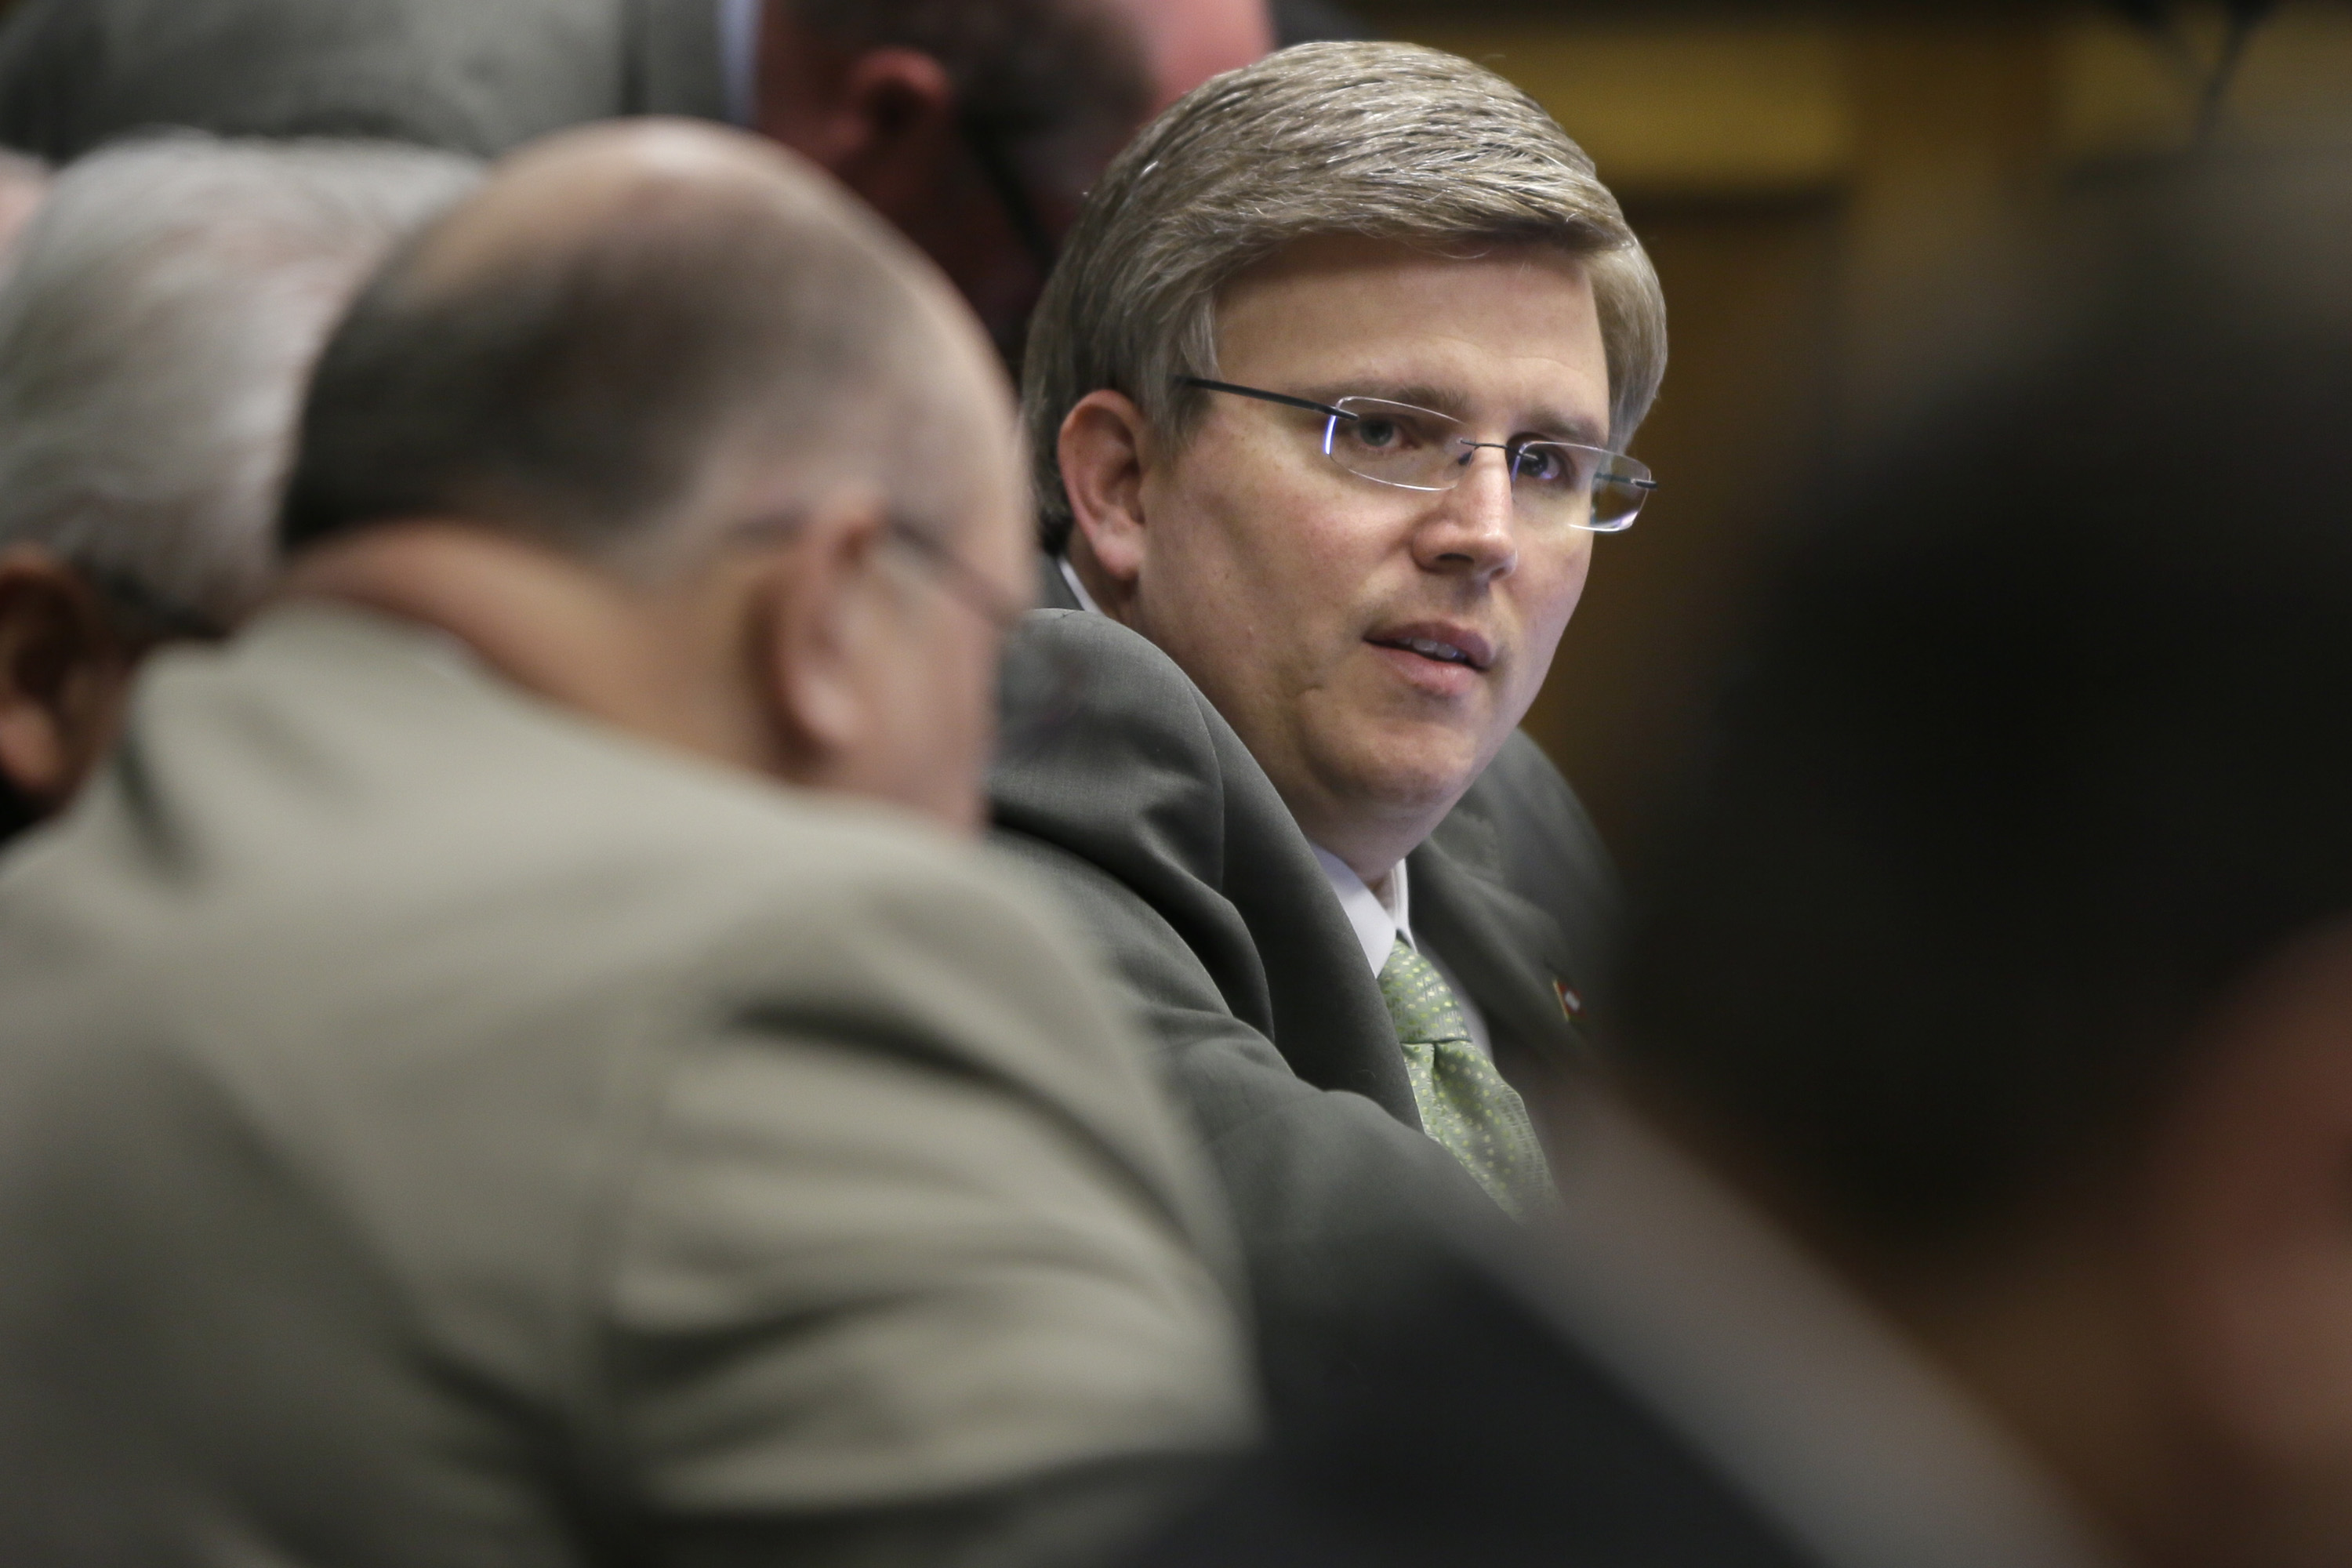 Rep. Justin T. Harris, R-West Fork, questions a witness during a meeting of the House Committee on Education at the Arkansas state Capitol in Little Rock, Ark. on Feb. 26, 2015. (Danny Johnston—AP)